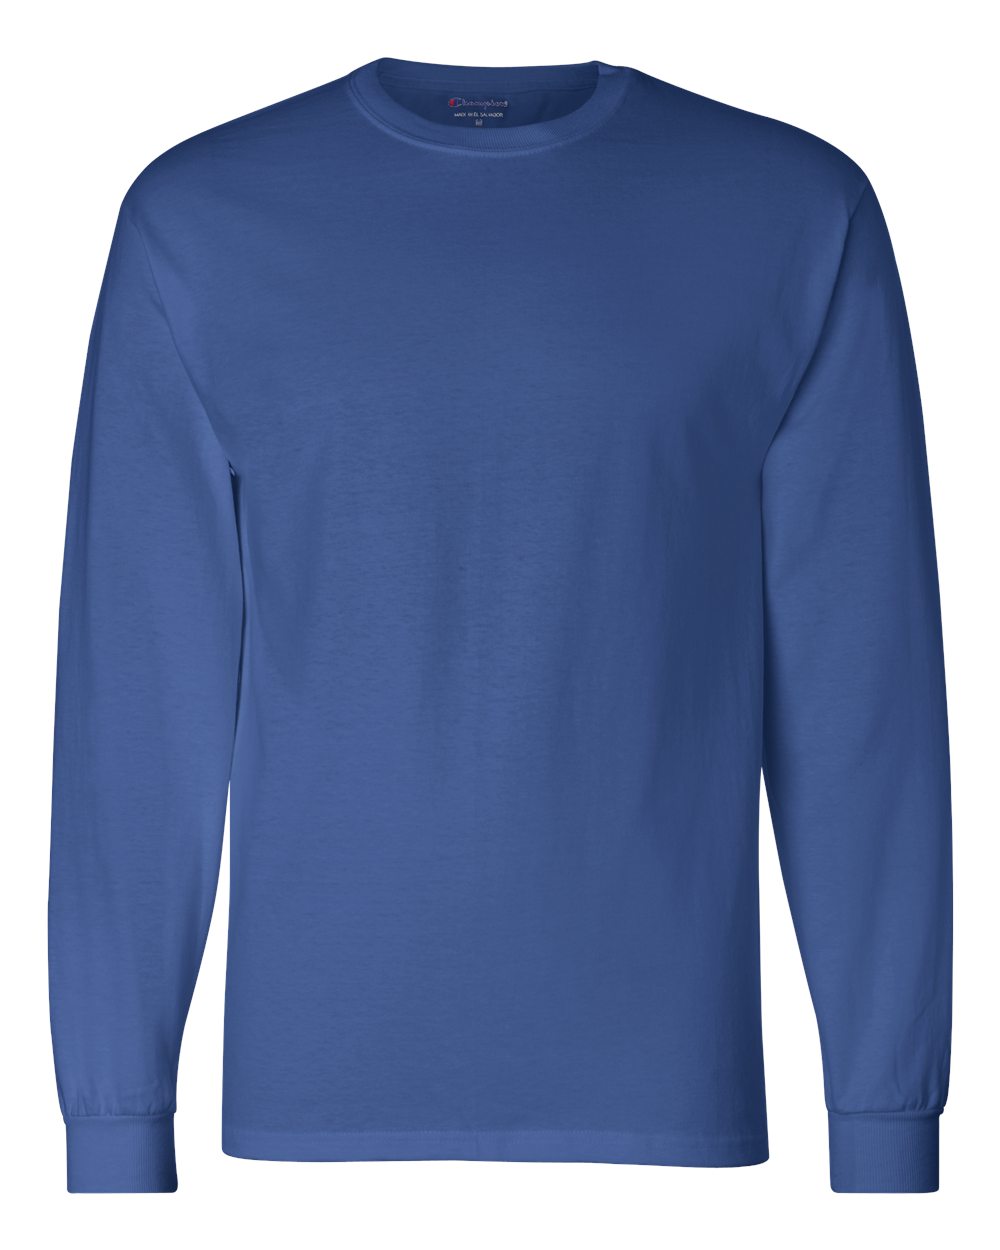 Champion Mens Long Sleeve Cotton T Shirt Blank Plain Solid CC8C up to ...